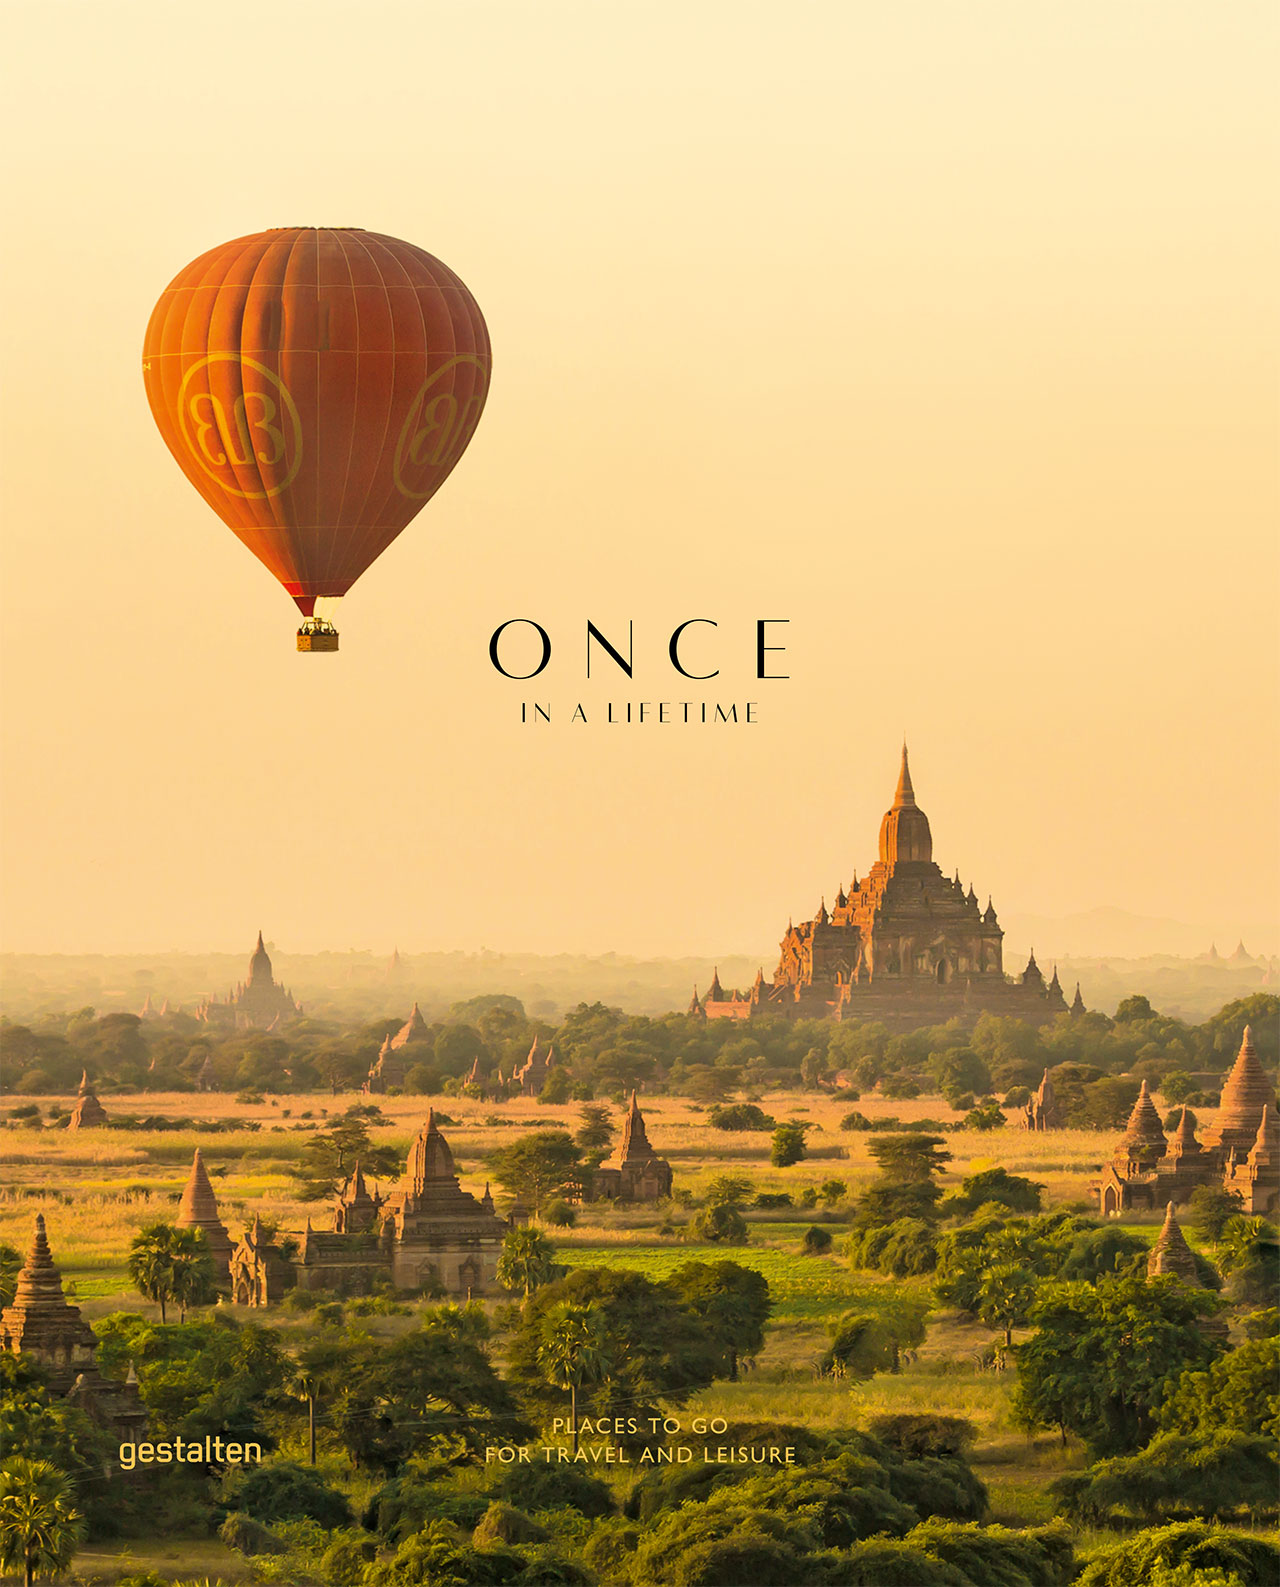 Front cover image: Balloons over Bagan.
Photography by Ken Spence, from Once in a Lifetime Vol. 2, Copyright Gestalten 2015.